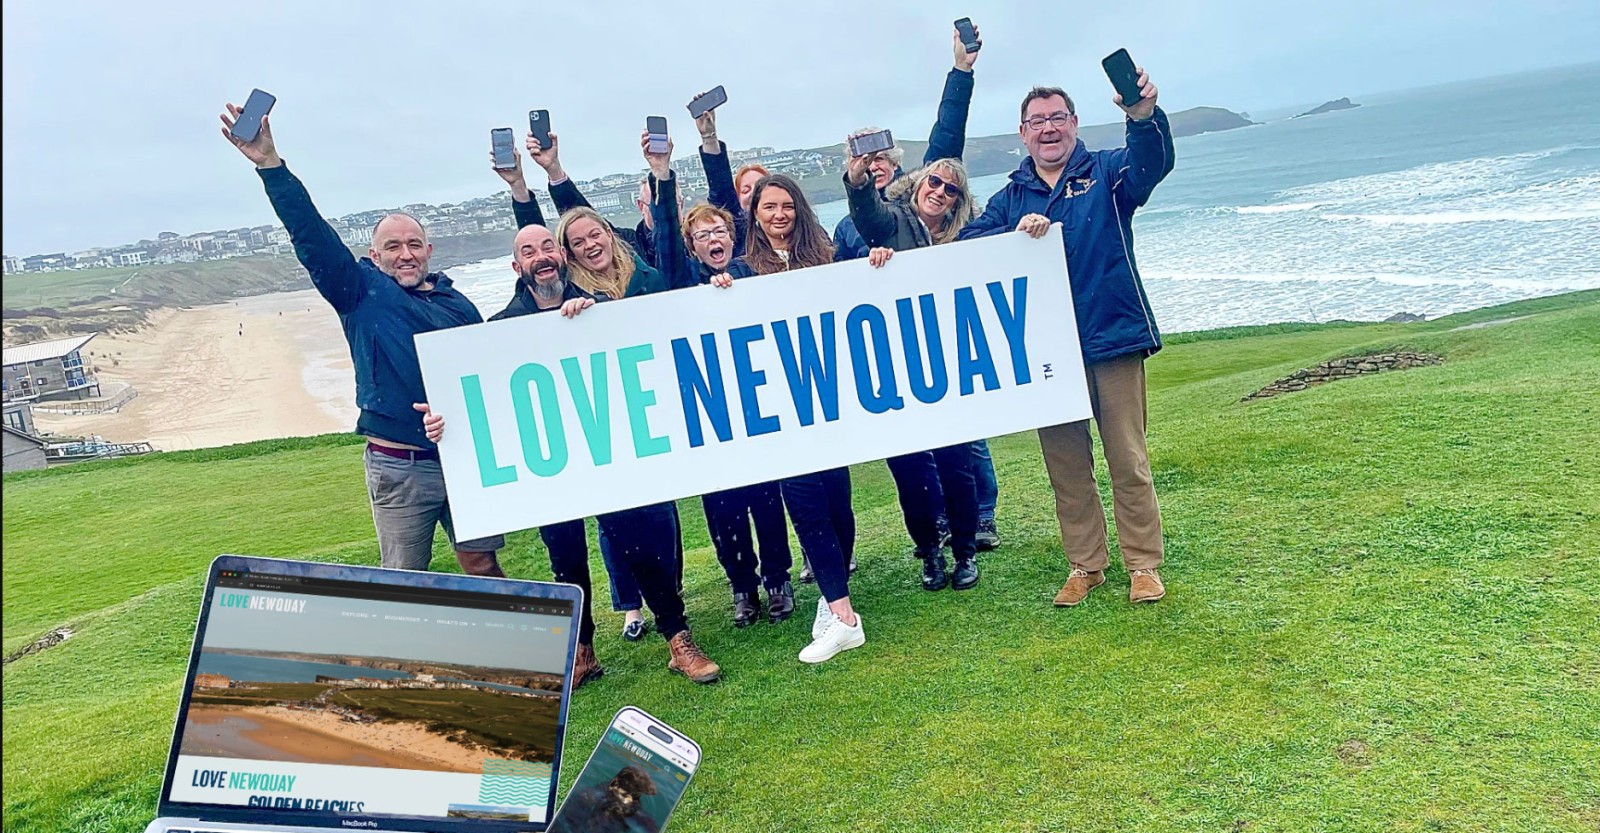 People holding a banner with the new branding: Love Newquay 